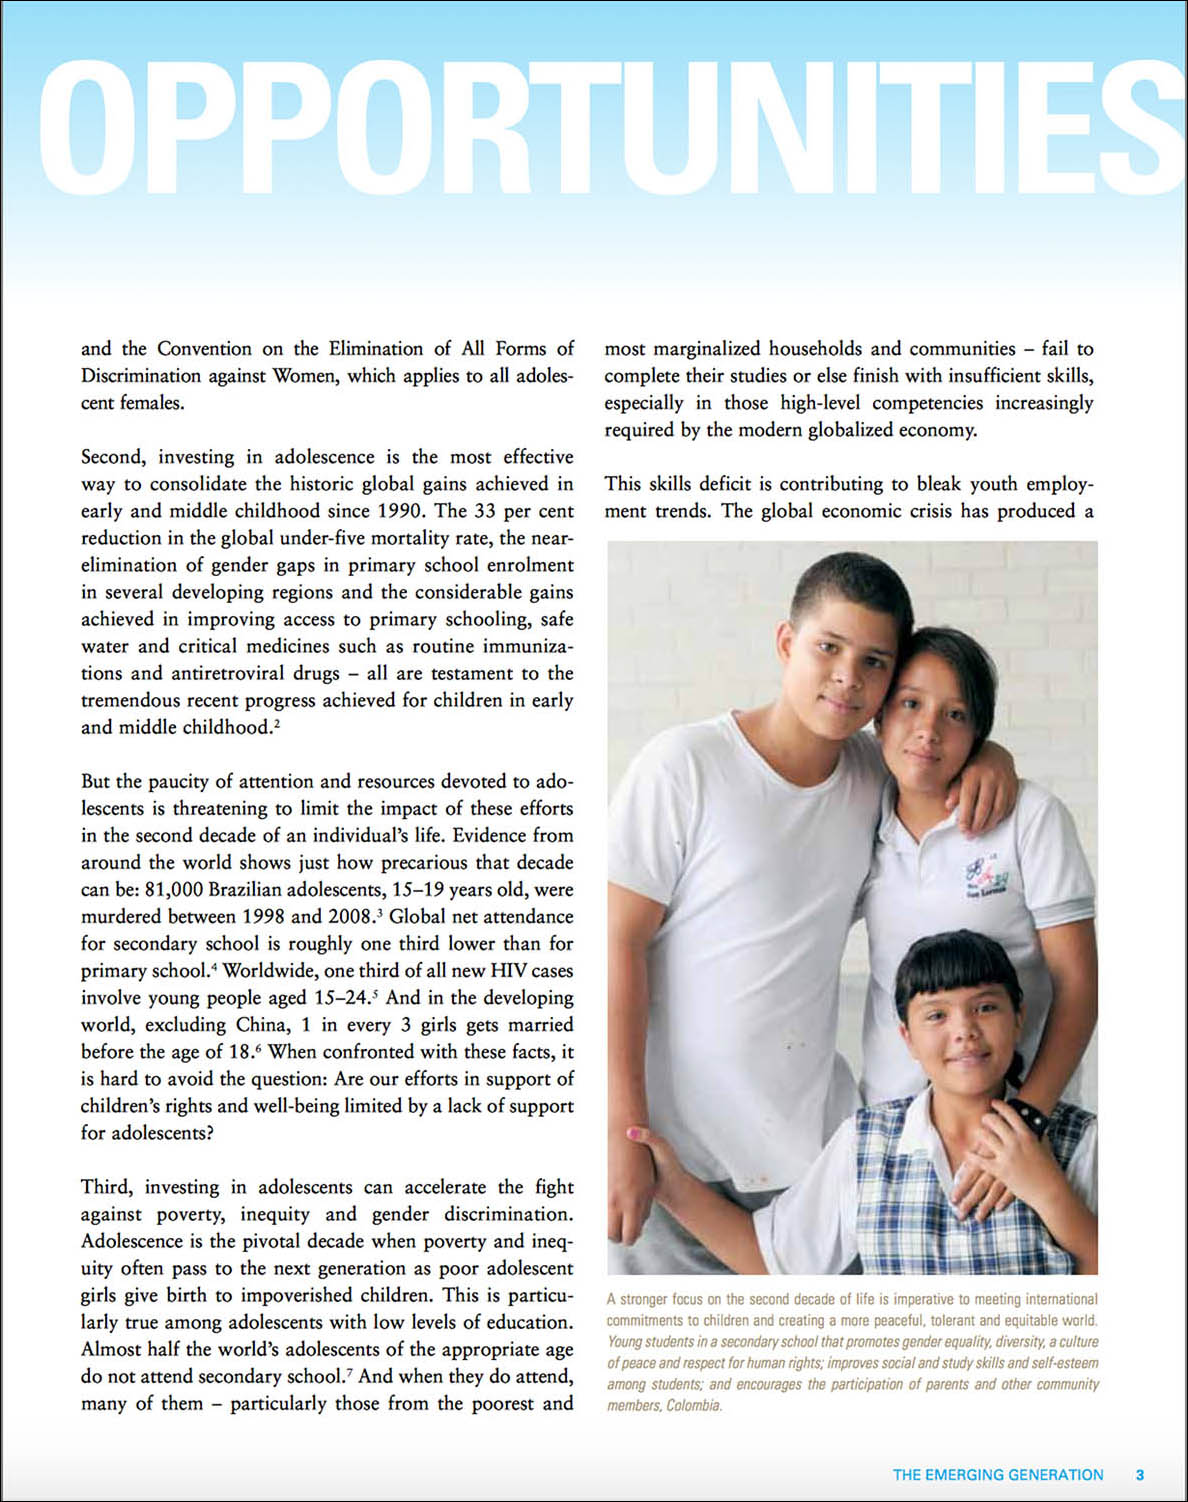 Screen capture of a page from a report showing 2 adolescent girls and an adolescent boy in Colombia.